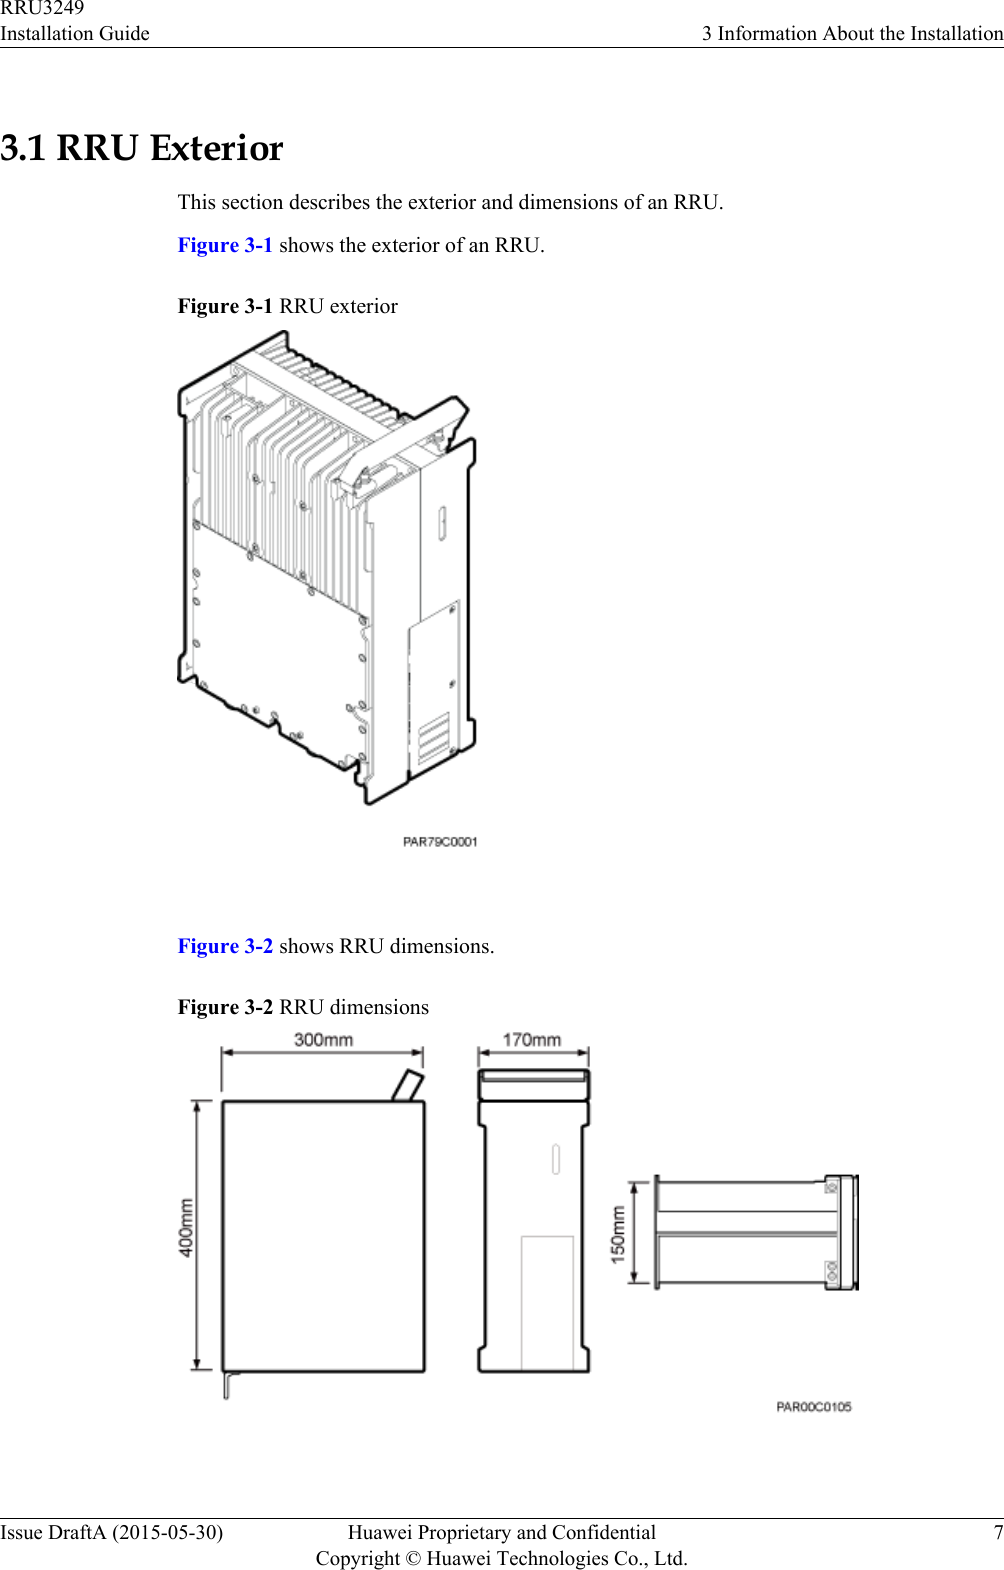 3.1 RRU ExteriorThis section describes the exterior and dimensions of an RRU.Figure 3-1 shows the exterior of an RRU.Figure 3-1 RRU exterior Figure 3-2 shows RRU dimensions.Figure 3-2 RRU dimensions RRU3249Installation Guide 3 Information About the InstallationIssue DraftA (2015-05-30) Huawei Proprietary and ConfidentialCopyright © Huawei Technologies Co., Ltd.7